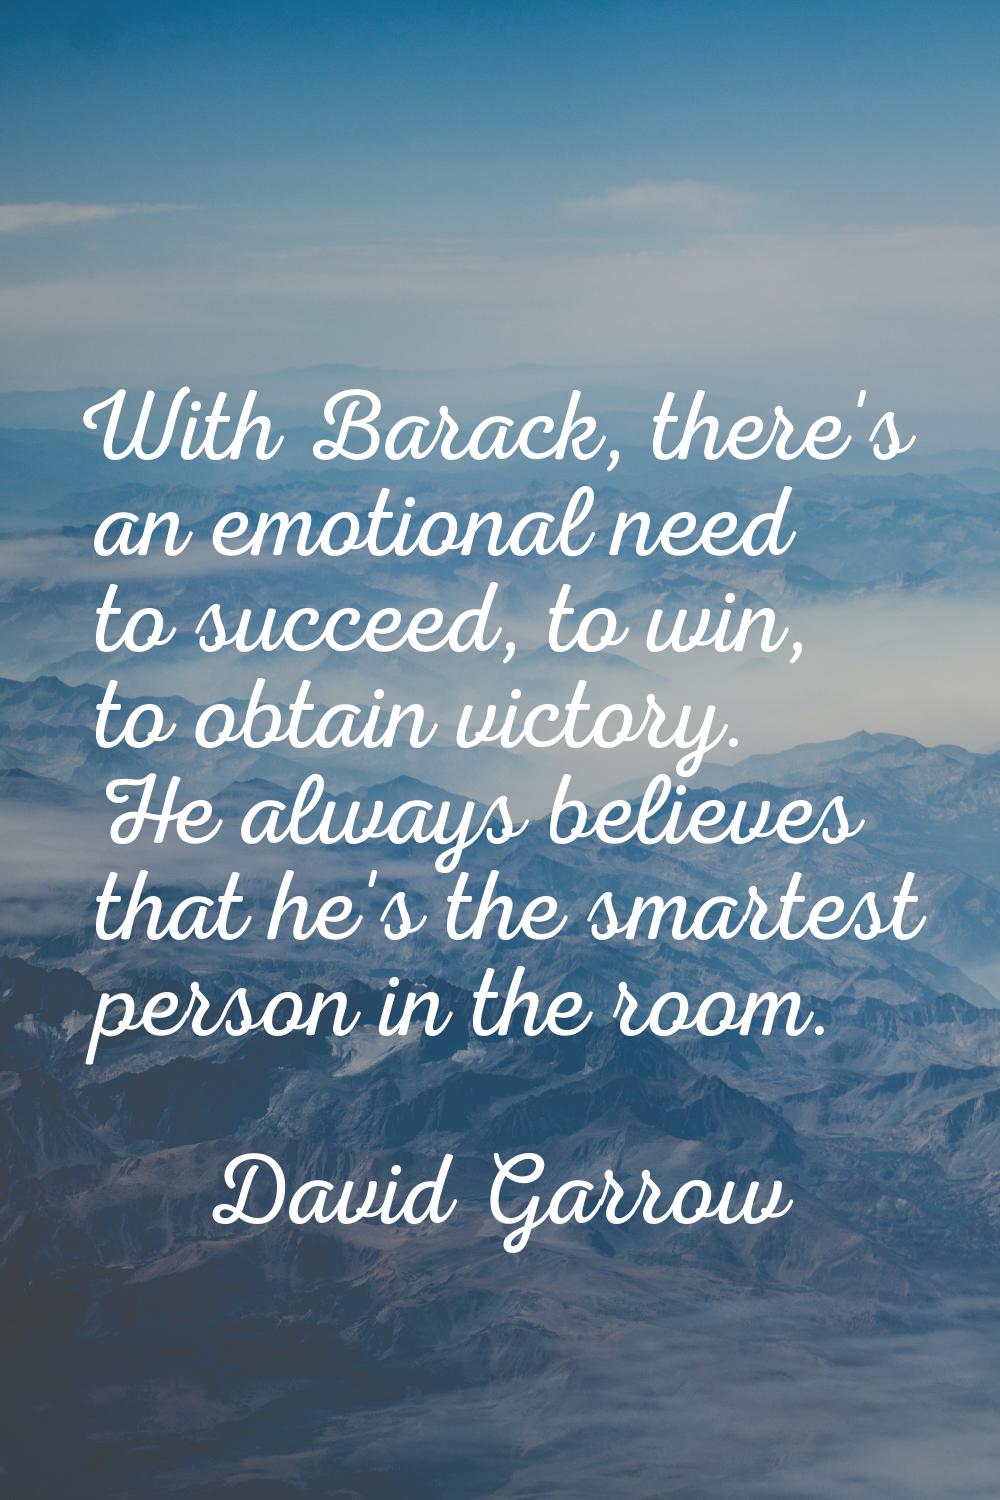 With Barack, there's an emotional need to succeed, to win, to obtain victory. He always believes th